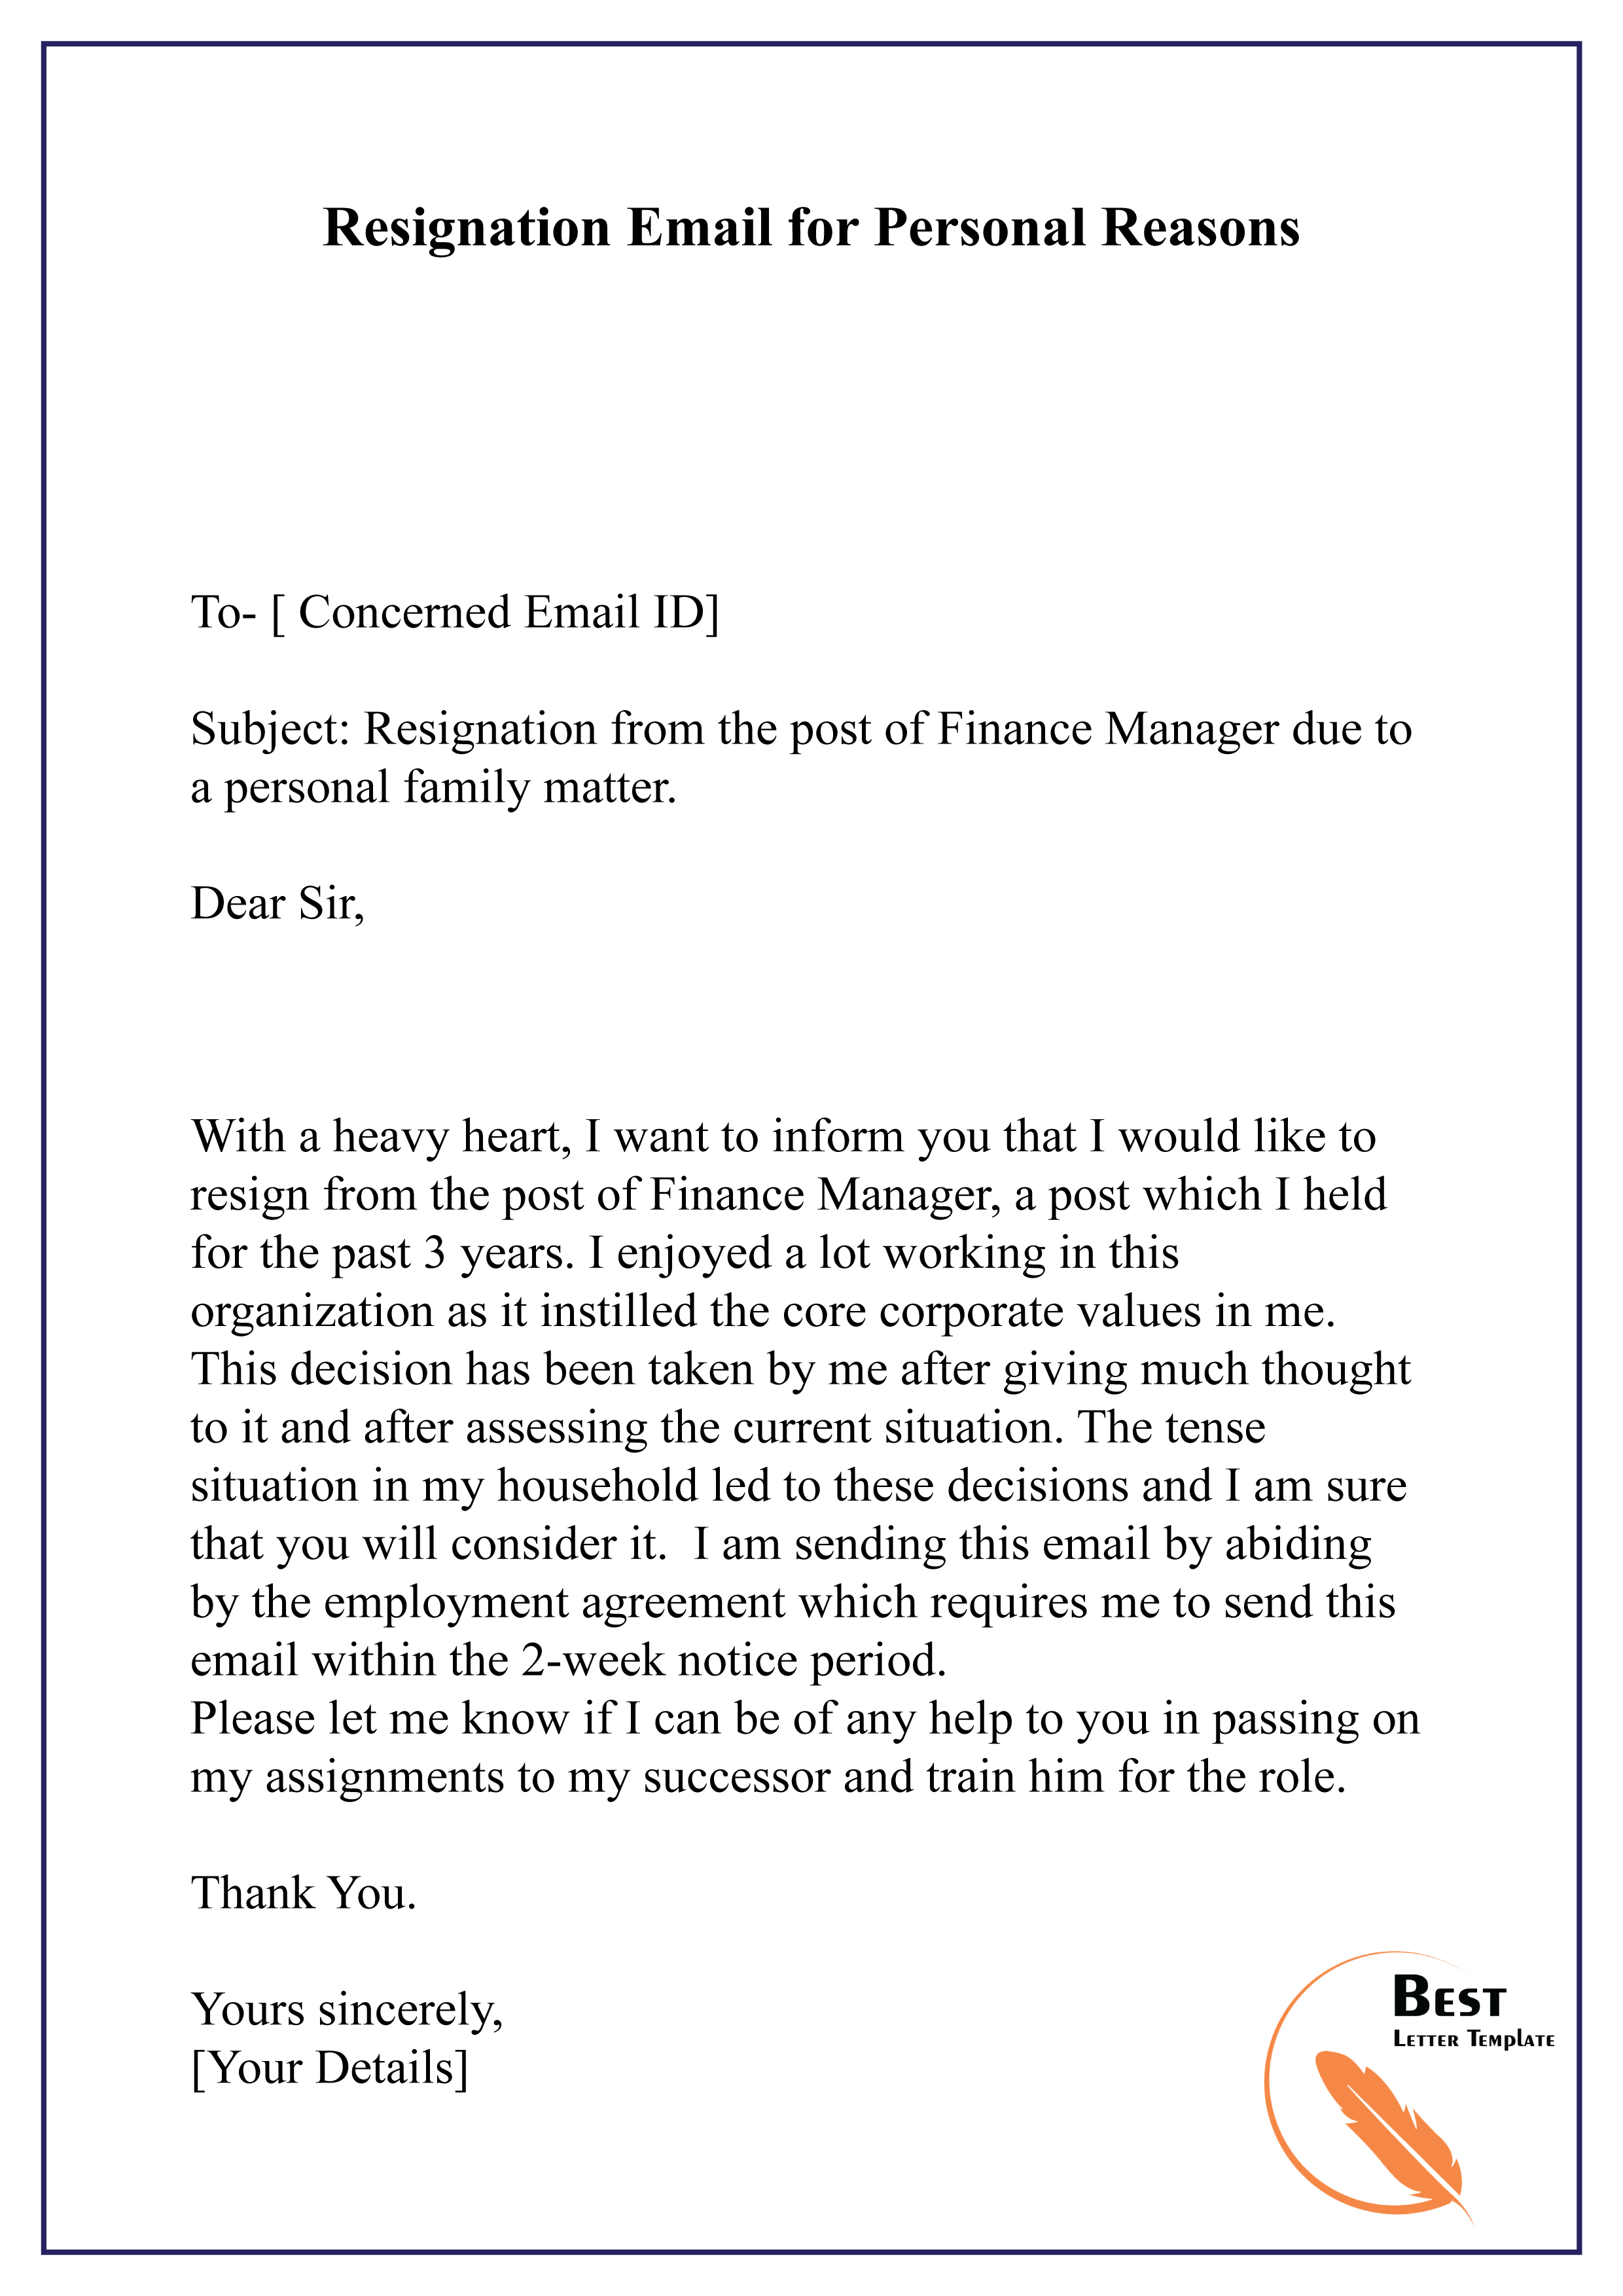 Letter Of Resignation Email Template from bestlettertemplate.com